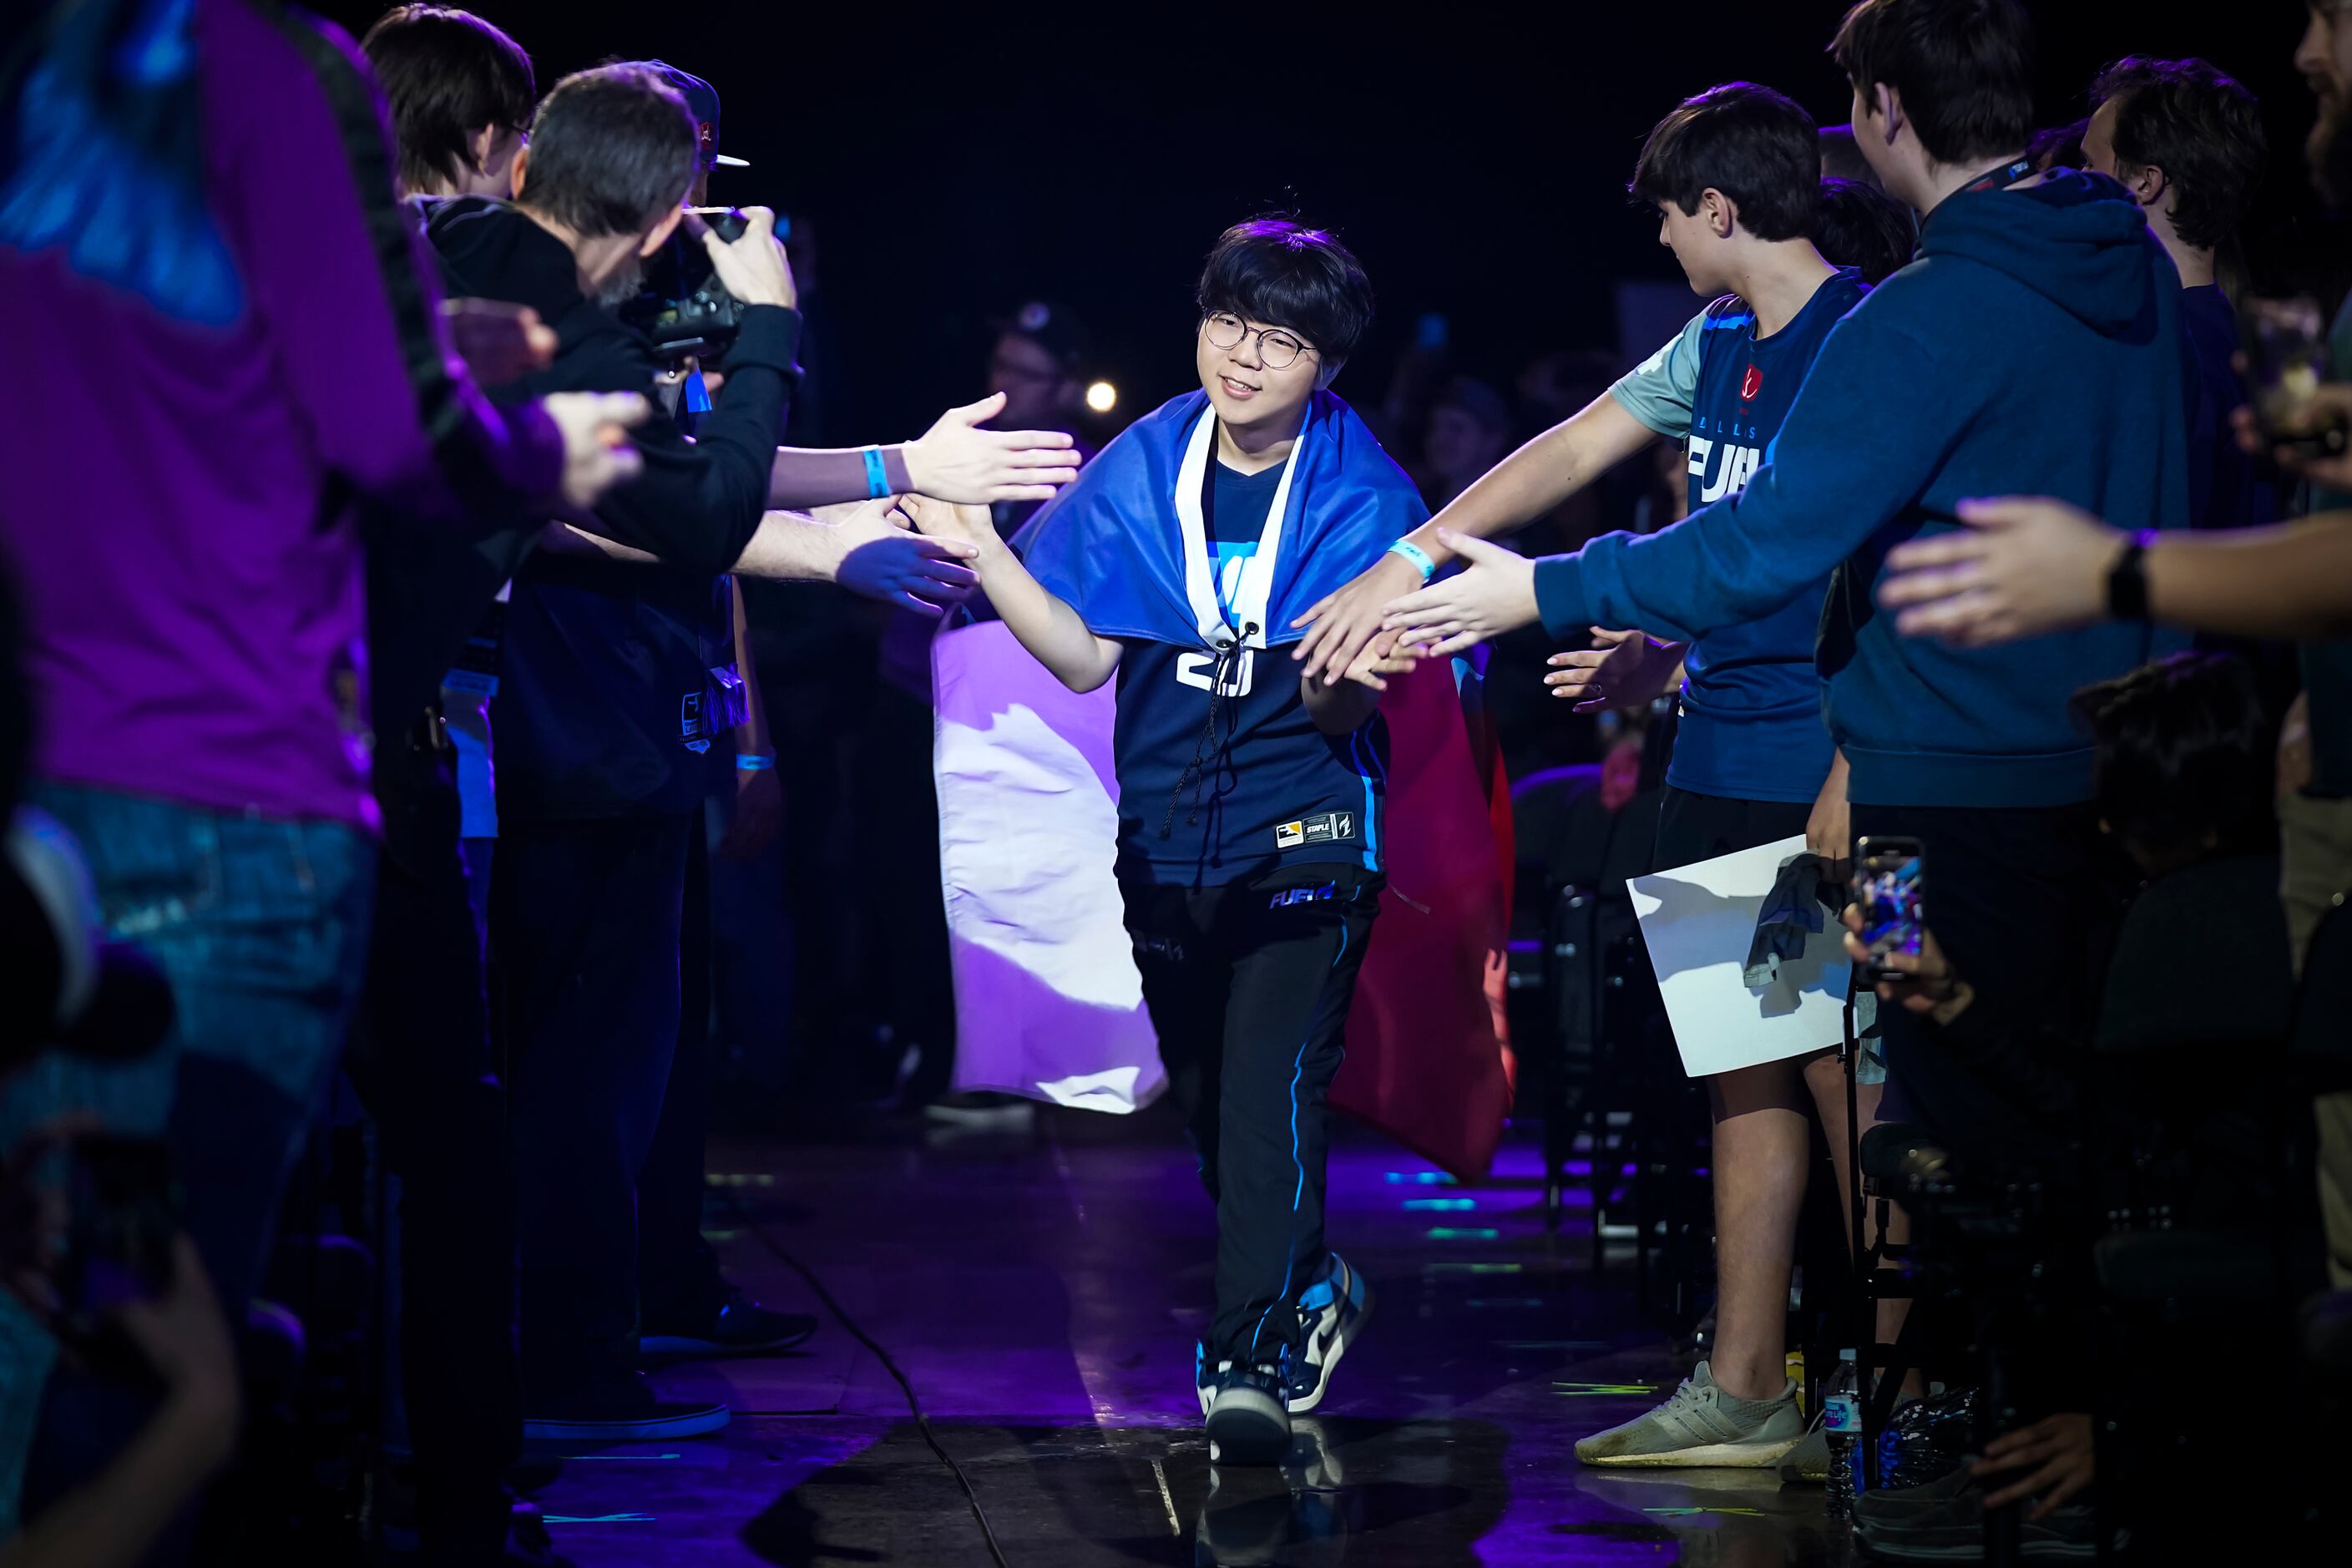 Kim "DoHa" Dong-ha of the Dallas Fuel is introduced before the start of a Overwatch League...